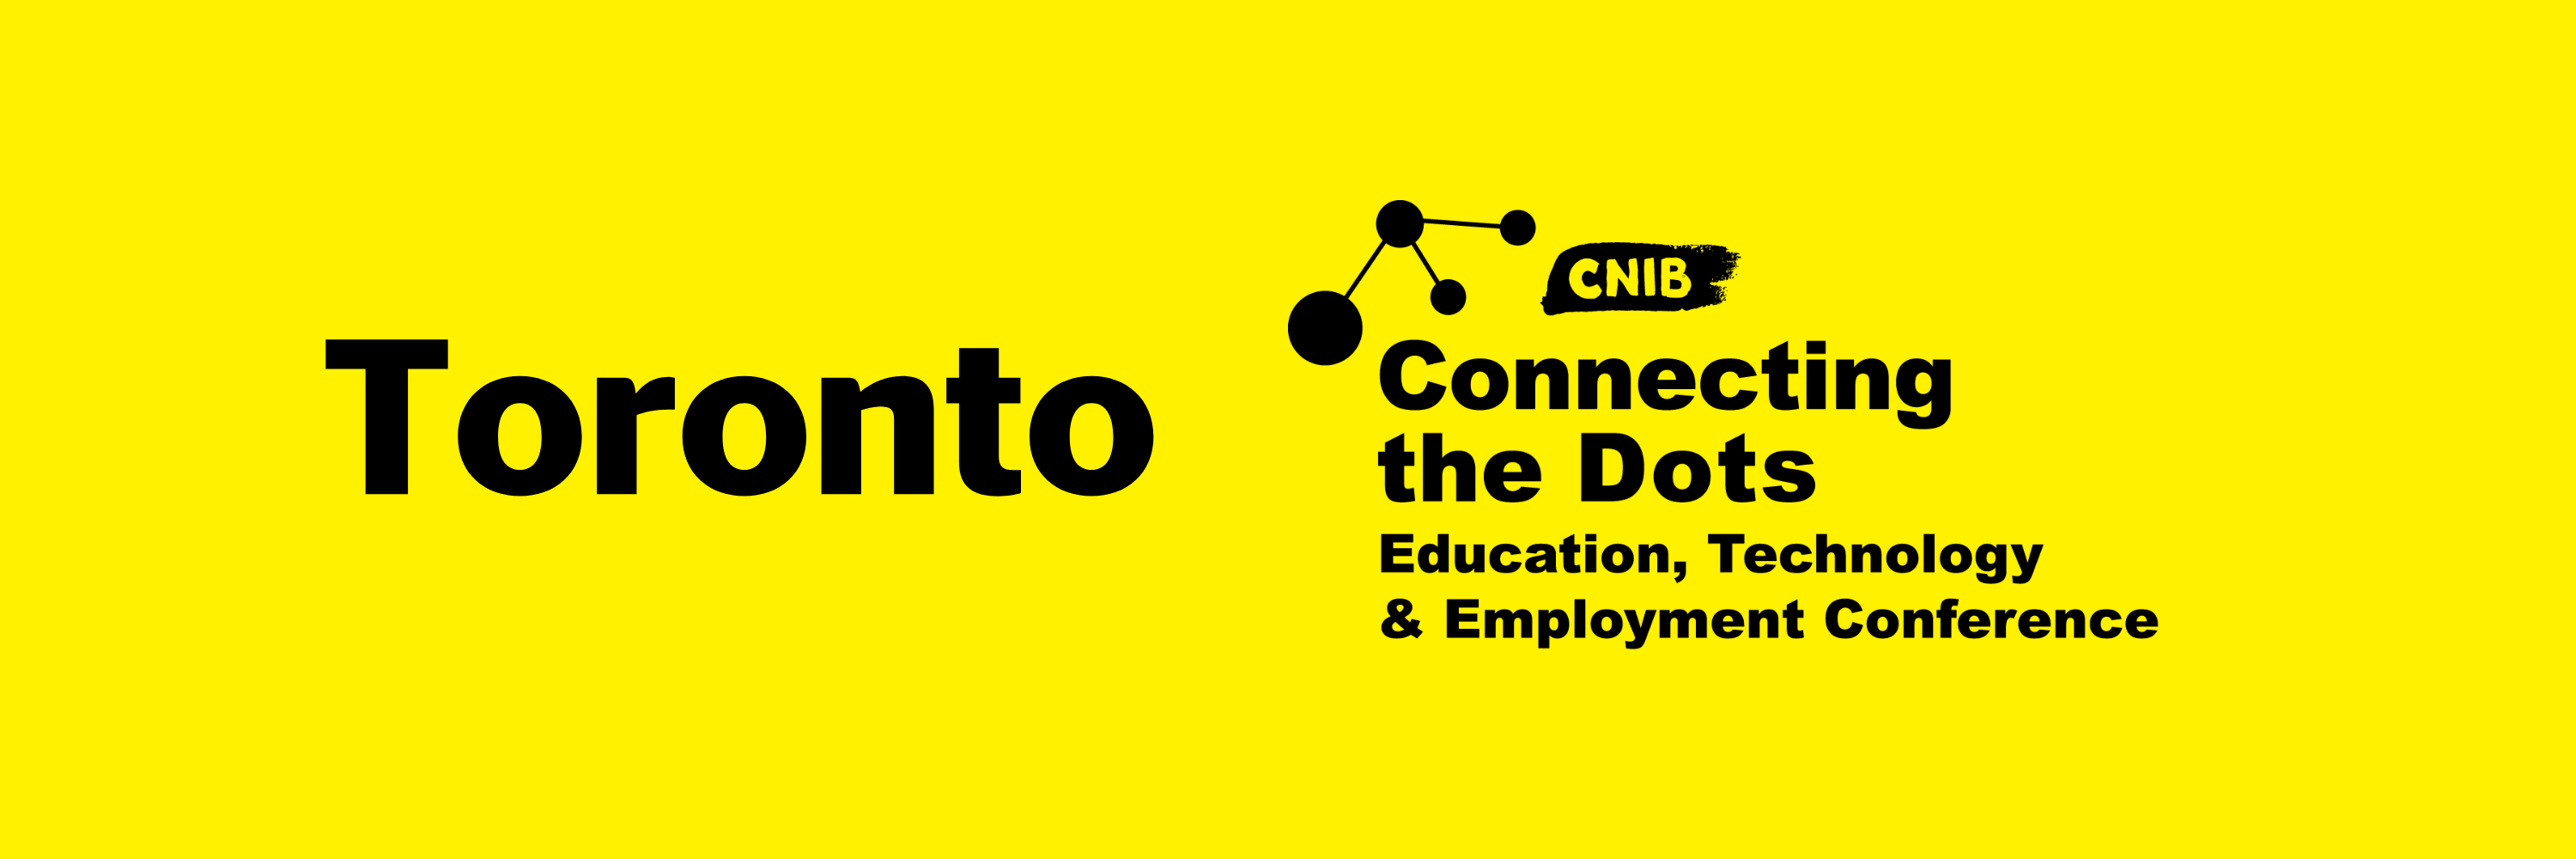 Toronto Connecting the Dots. Education, Technology and Employment Conference 